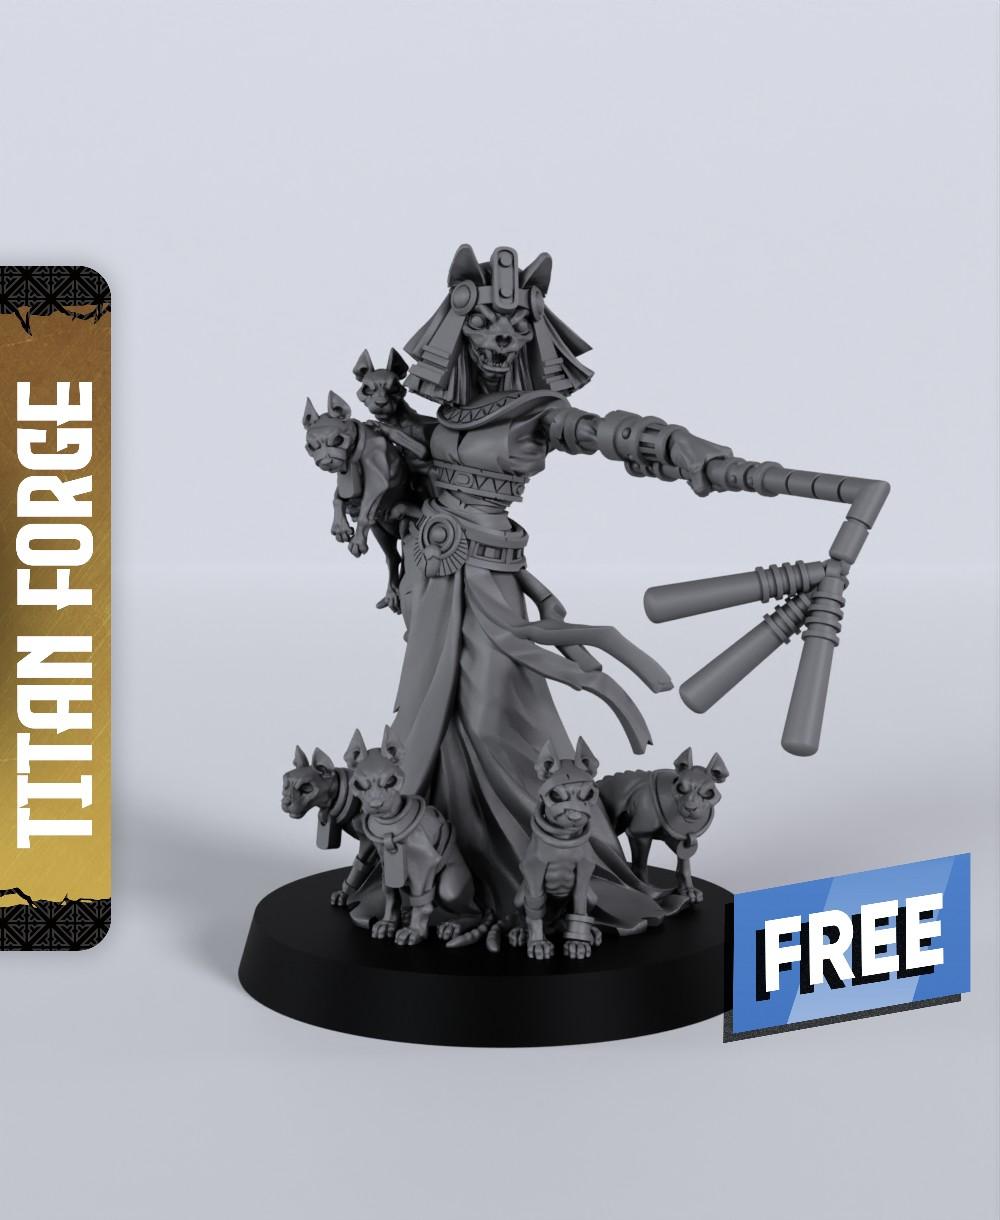 Death Cult Hierarch - With Free Dragon Warhammer - 5e DnD Inspired for RPG and Wargamers 3d model